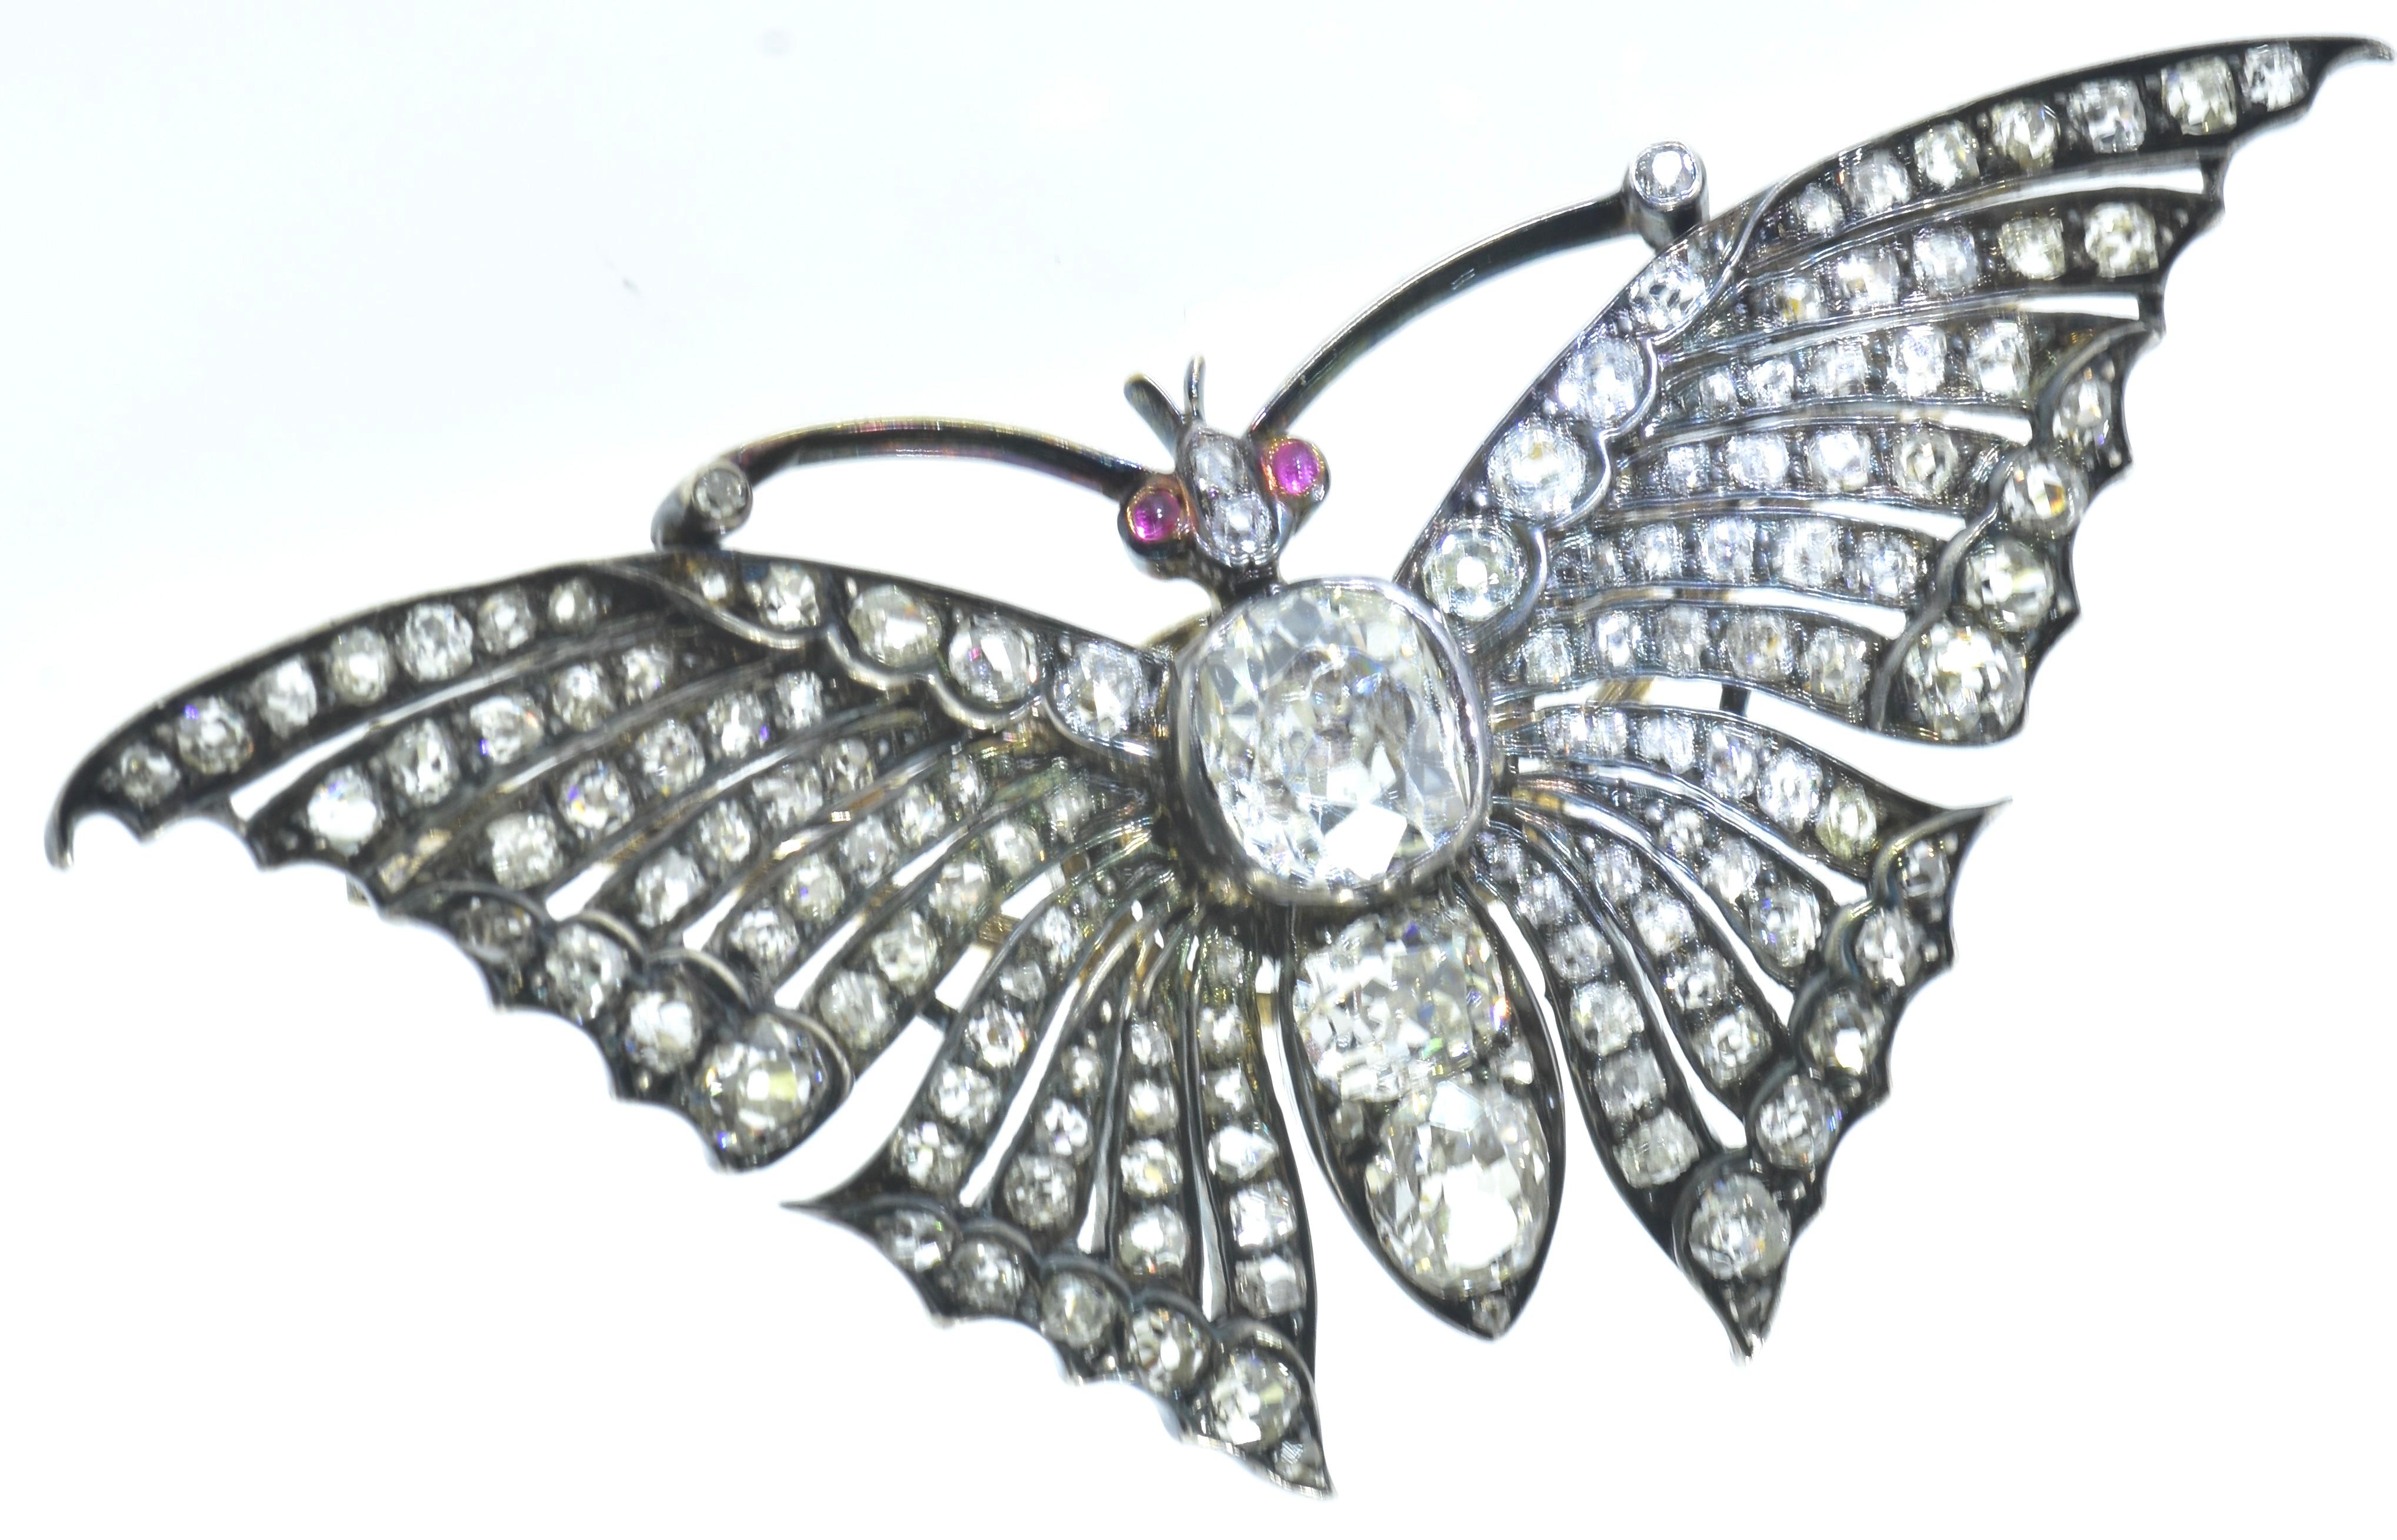 'En Tremblant' Diamond Butterfly Brooch, circa 1850.  18K yellow gold and topped with silver, which was the custom of the time period, this large brooch is impressive and one of the nicest we have seen of this genre.  2.5 inches wide and 1-1/8th